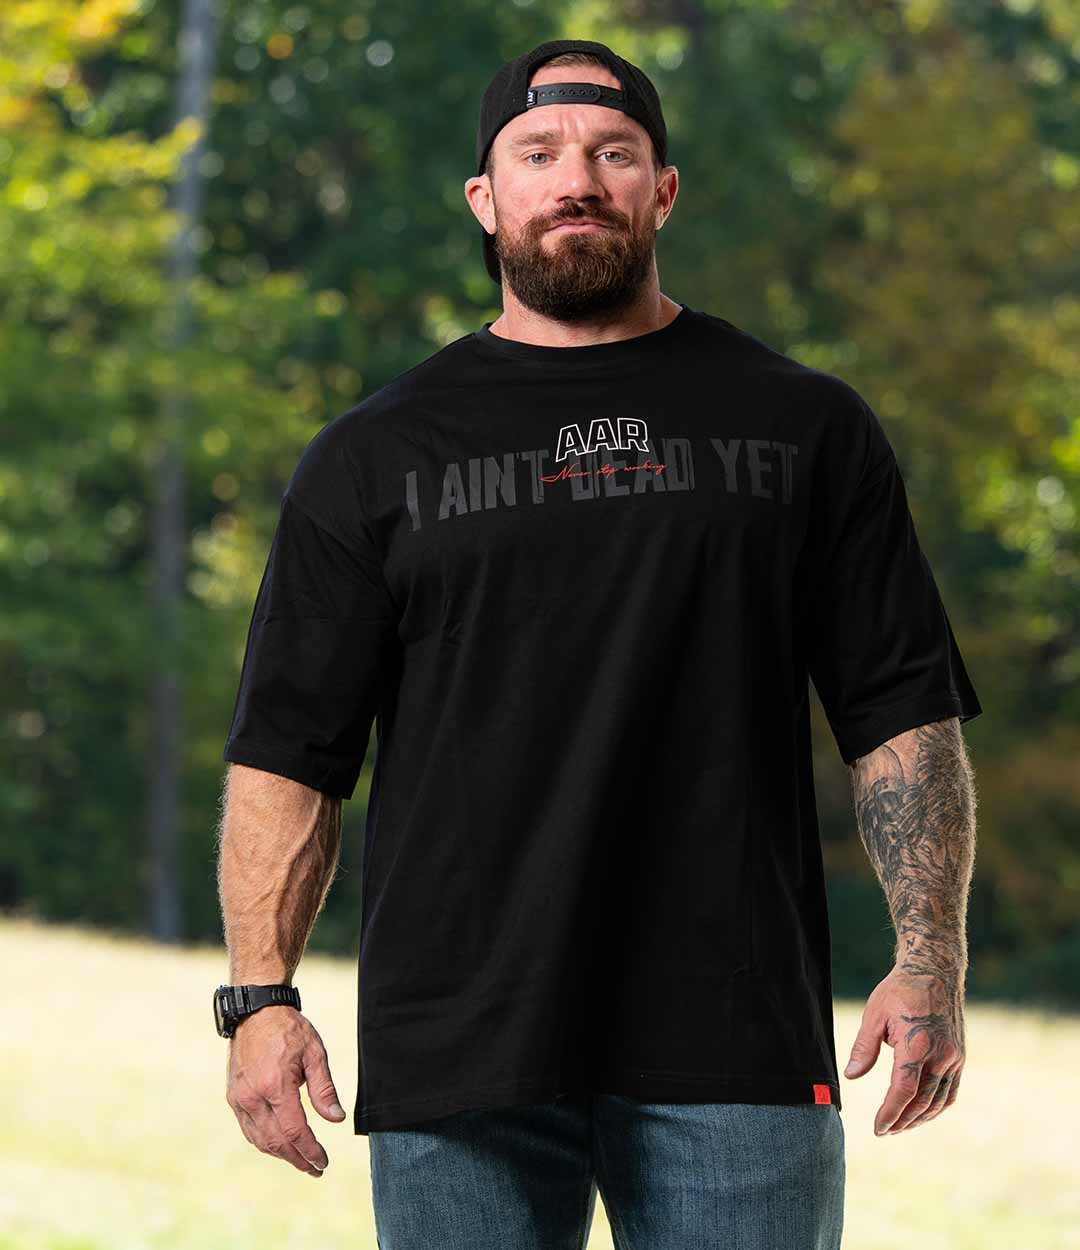 Suns Out Guns Out Tee - All American Roughneck